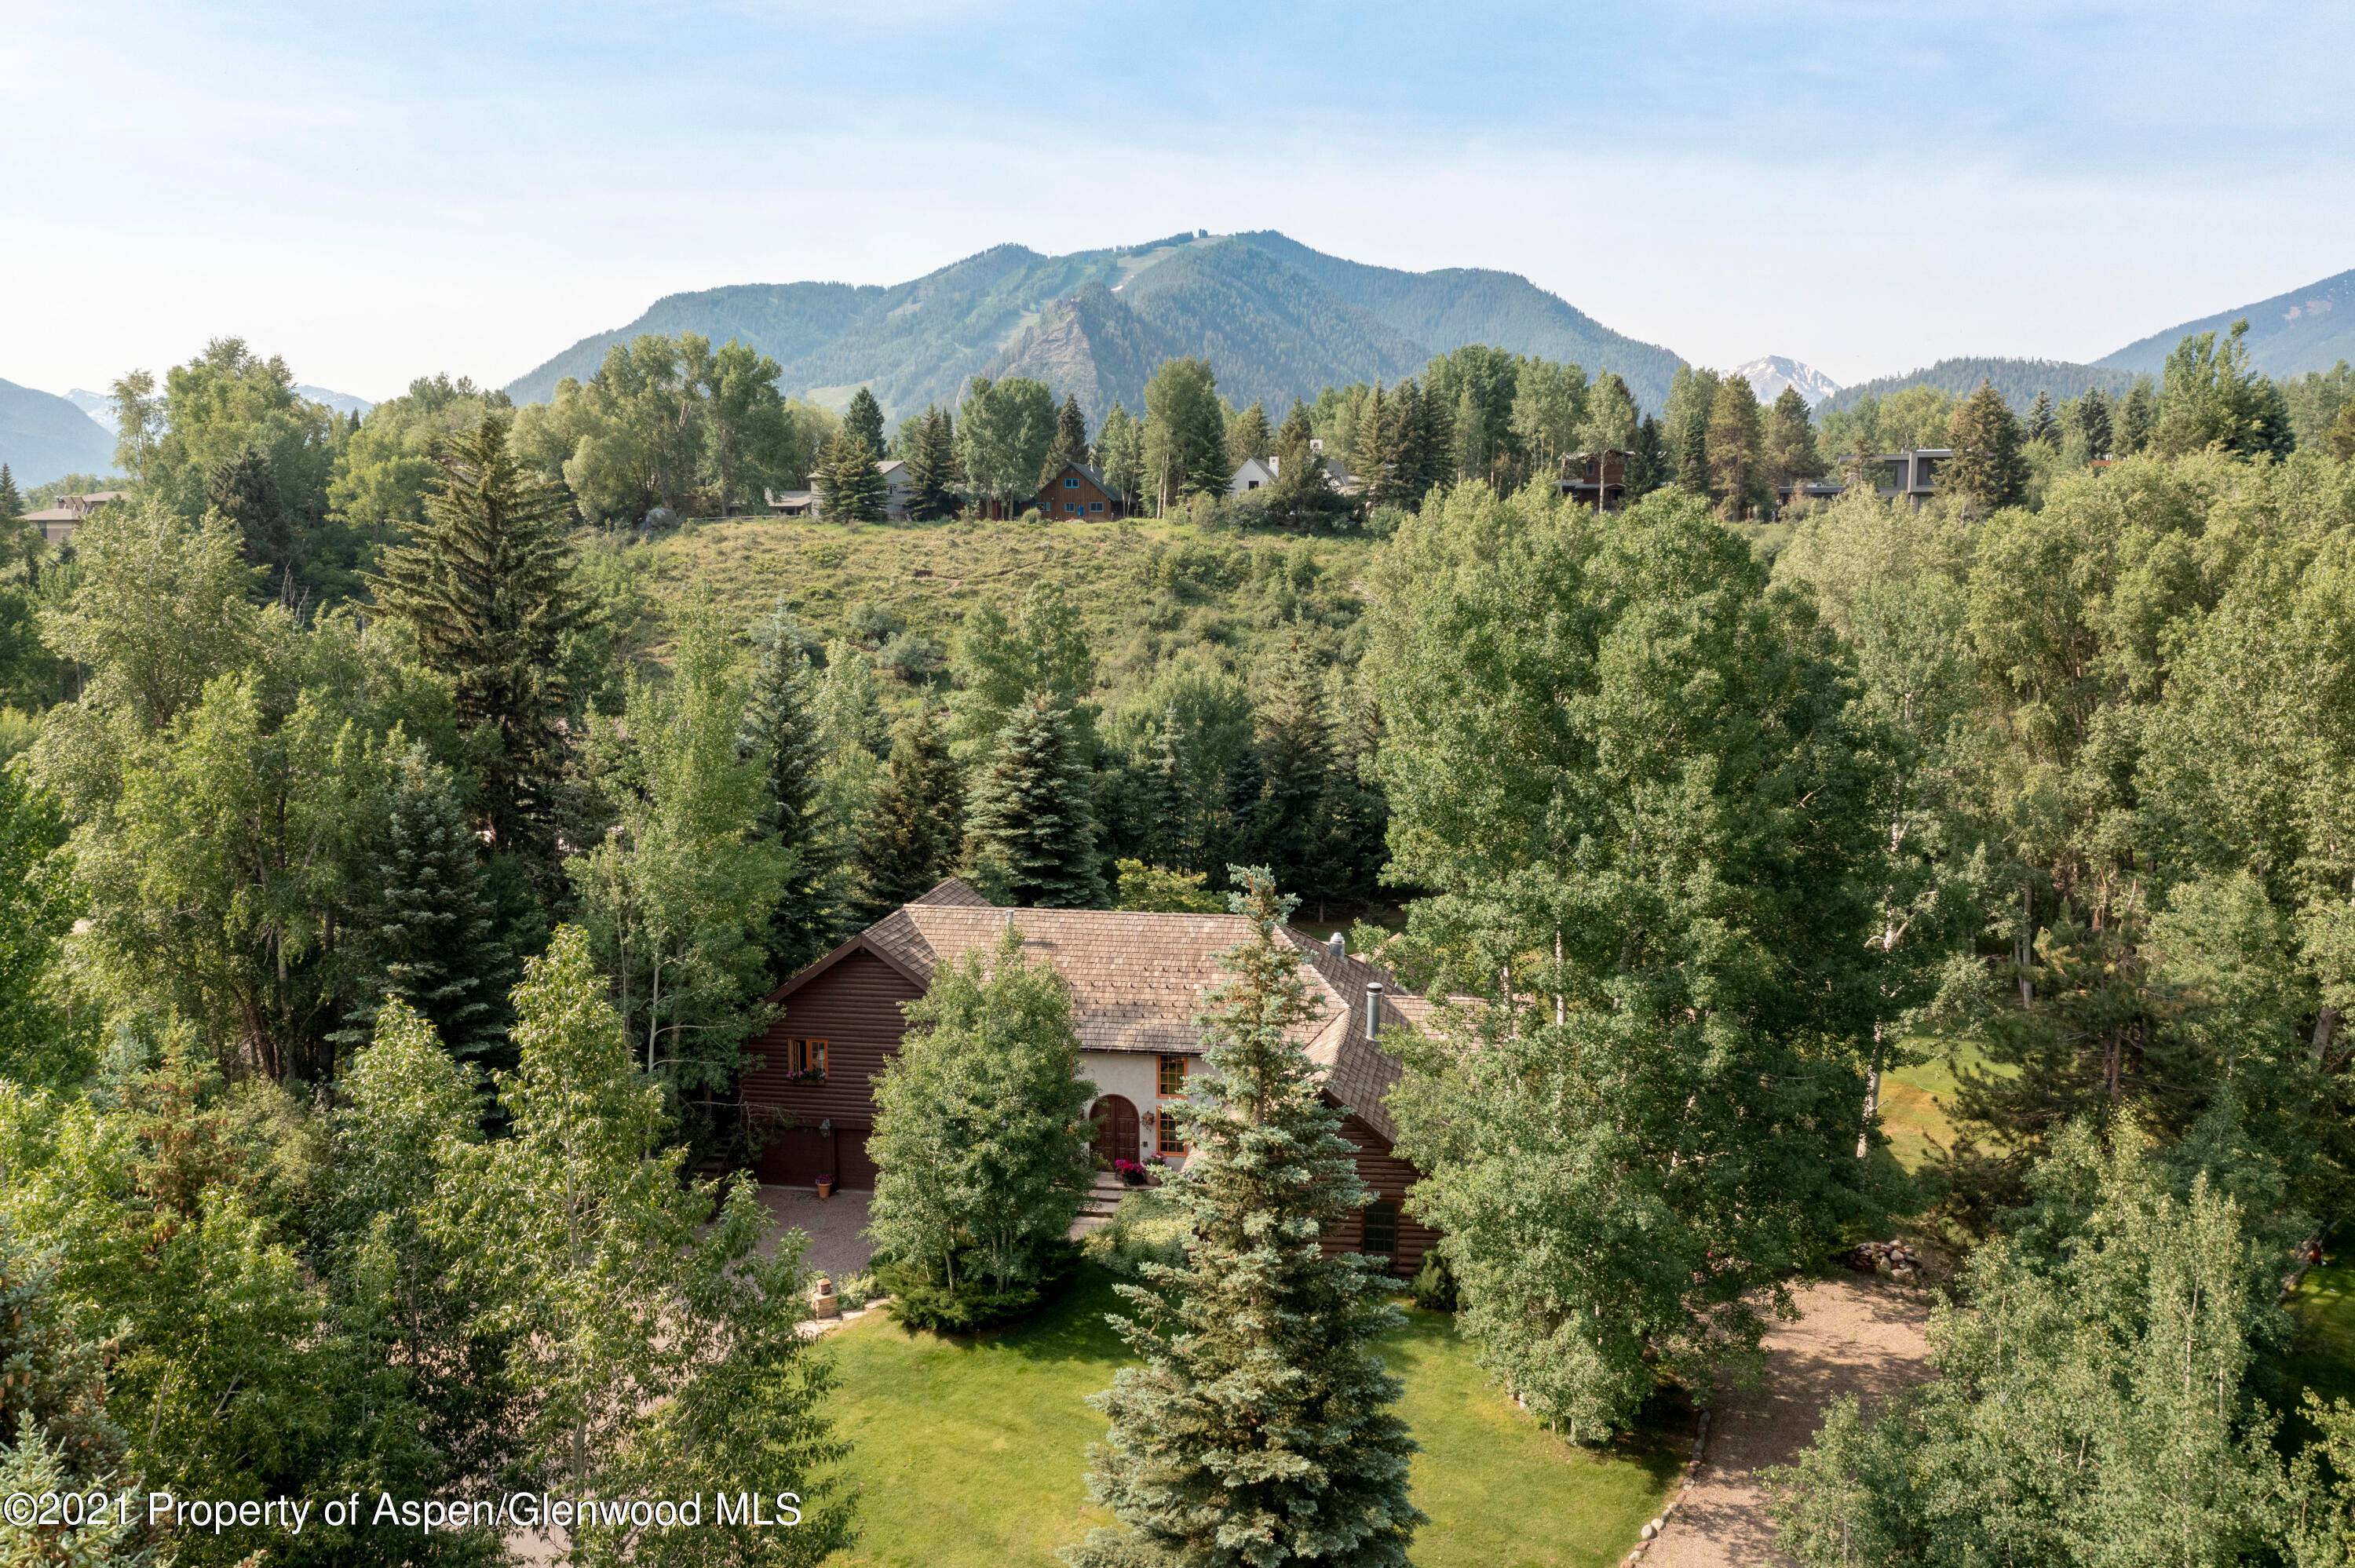 This unique Aspen home is located in West Aspen near the Roaring Fork River on Red Butte Drive.